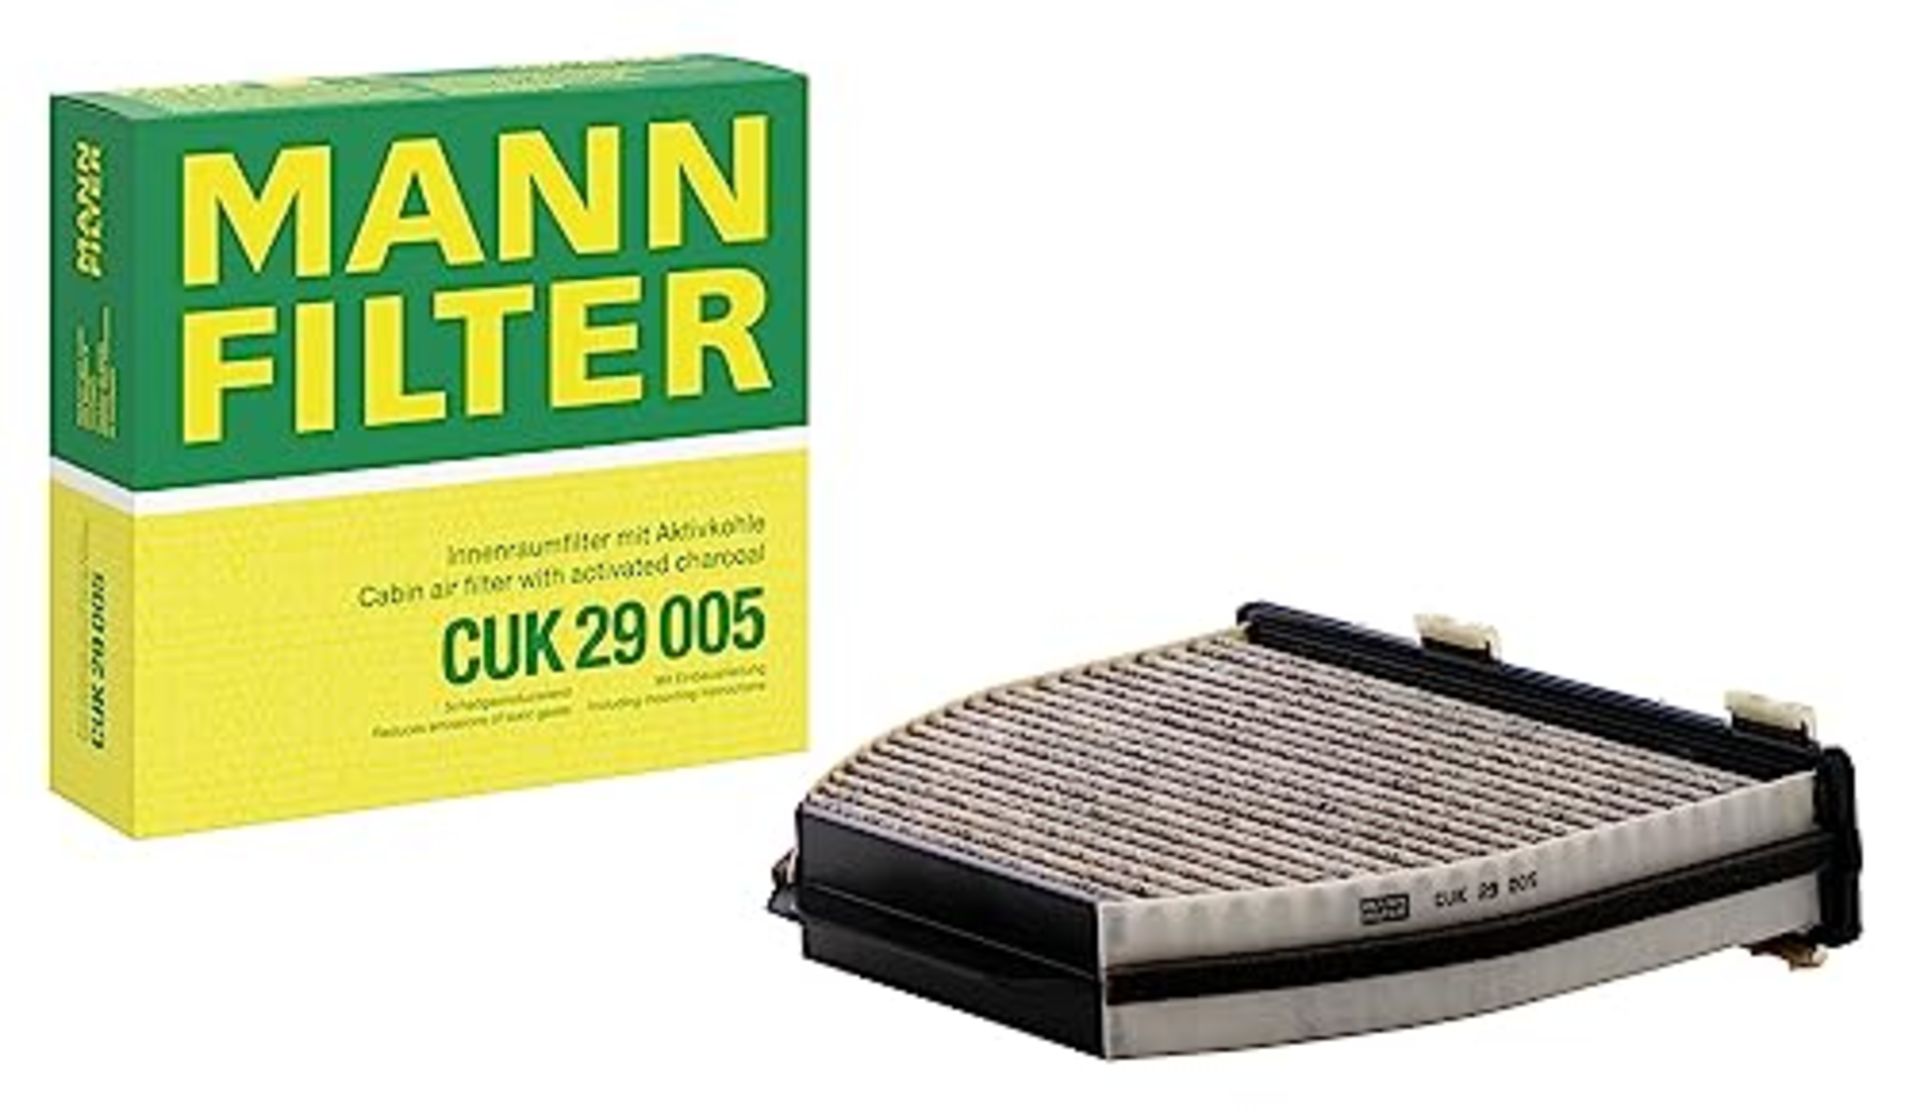 MANN-FILTER CUK 29 005 Interior Filter - Pollen Filter with Activated Carbon - For Car